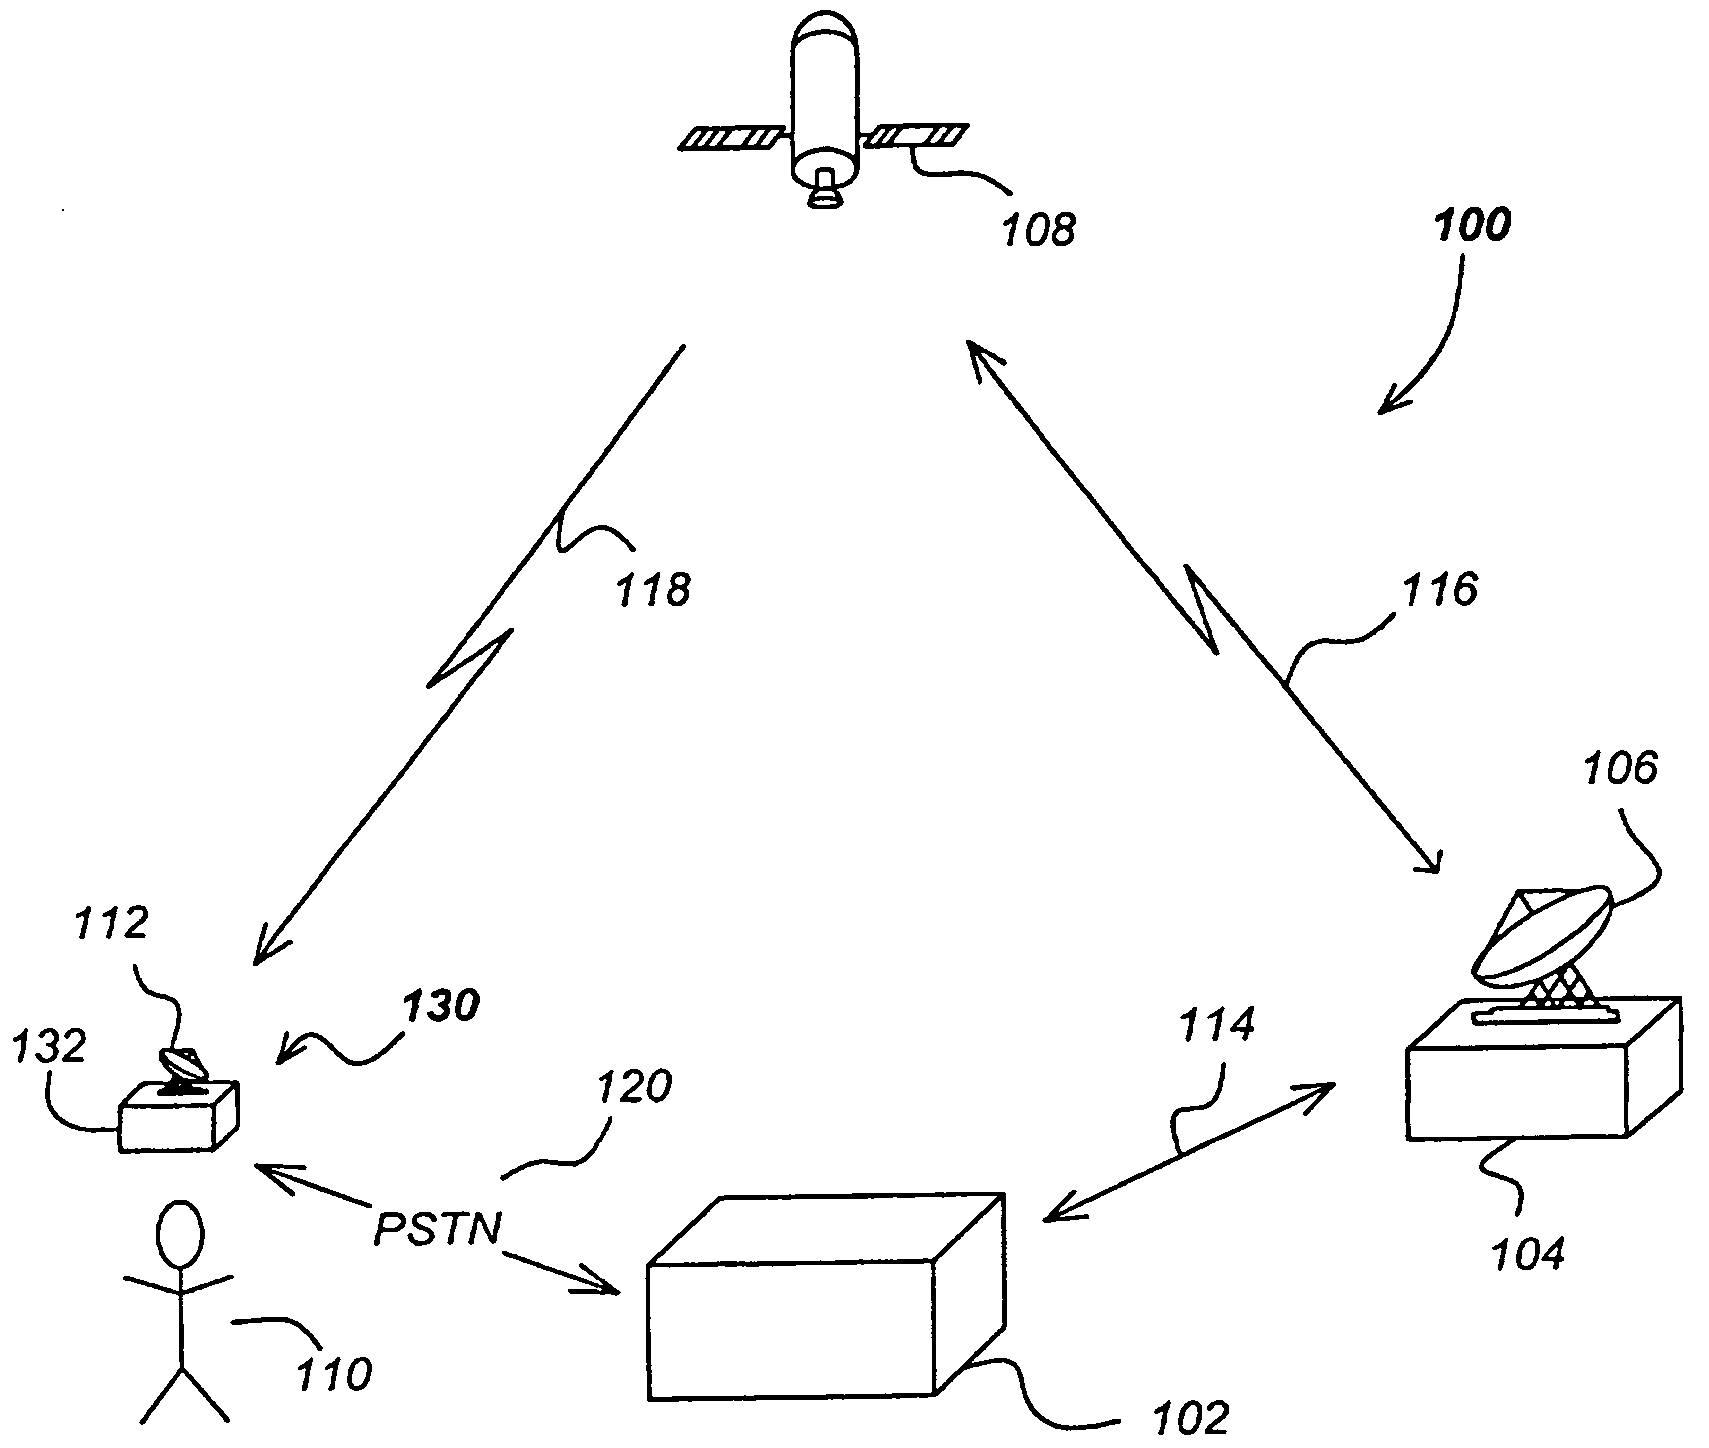 System and method for continuous broadcast service from non-geostationary orbits